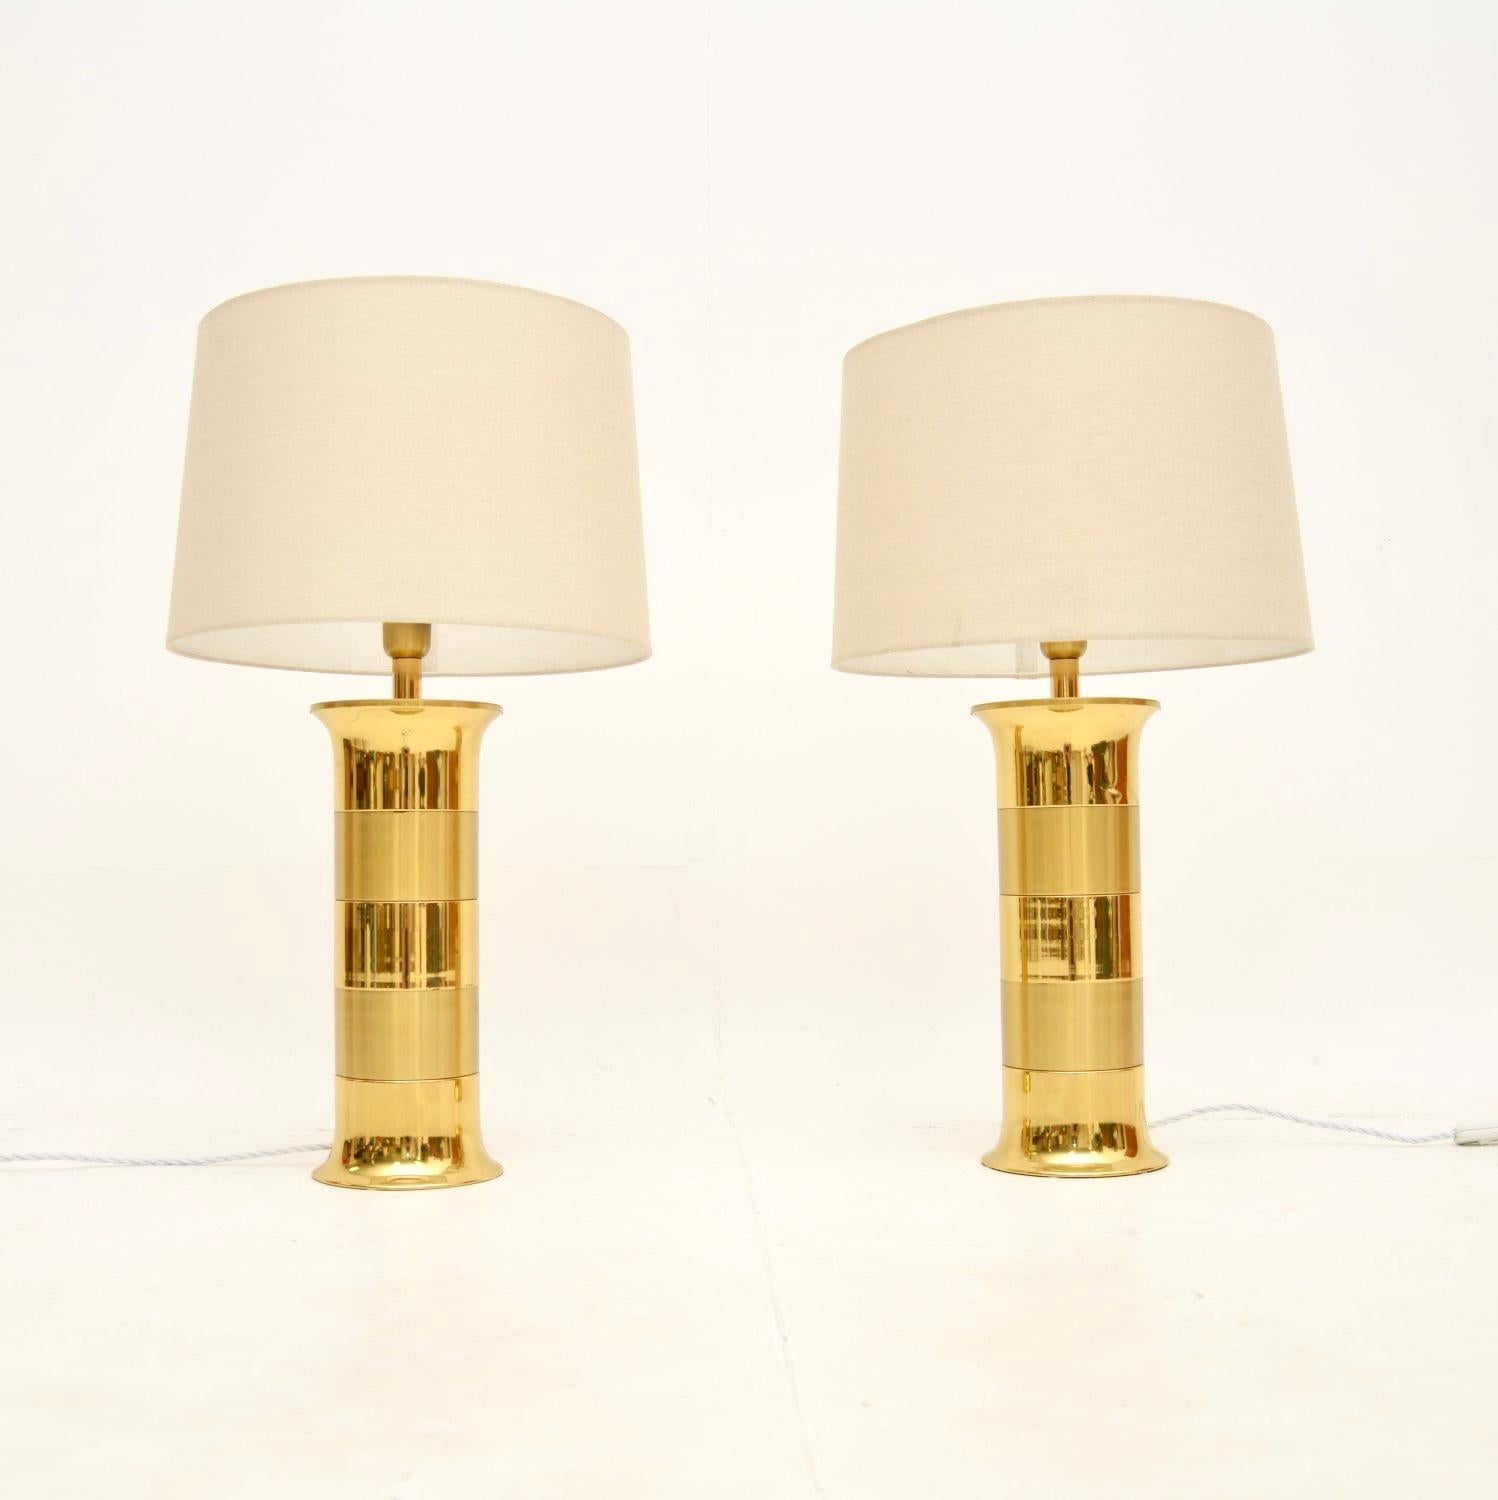 A stunning pair of large vintage brass table lamps, made in France and dating from the 1970’s.

The quality is outstanding, they are beautifully designed and are a fantastic size.

The condition is excellent for their age, with a few incredibly